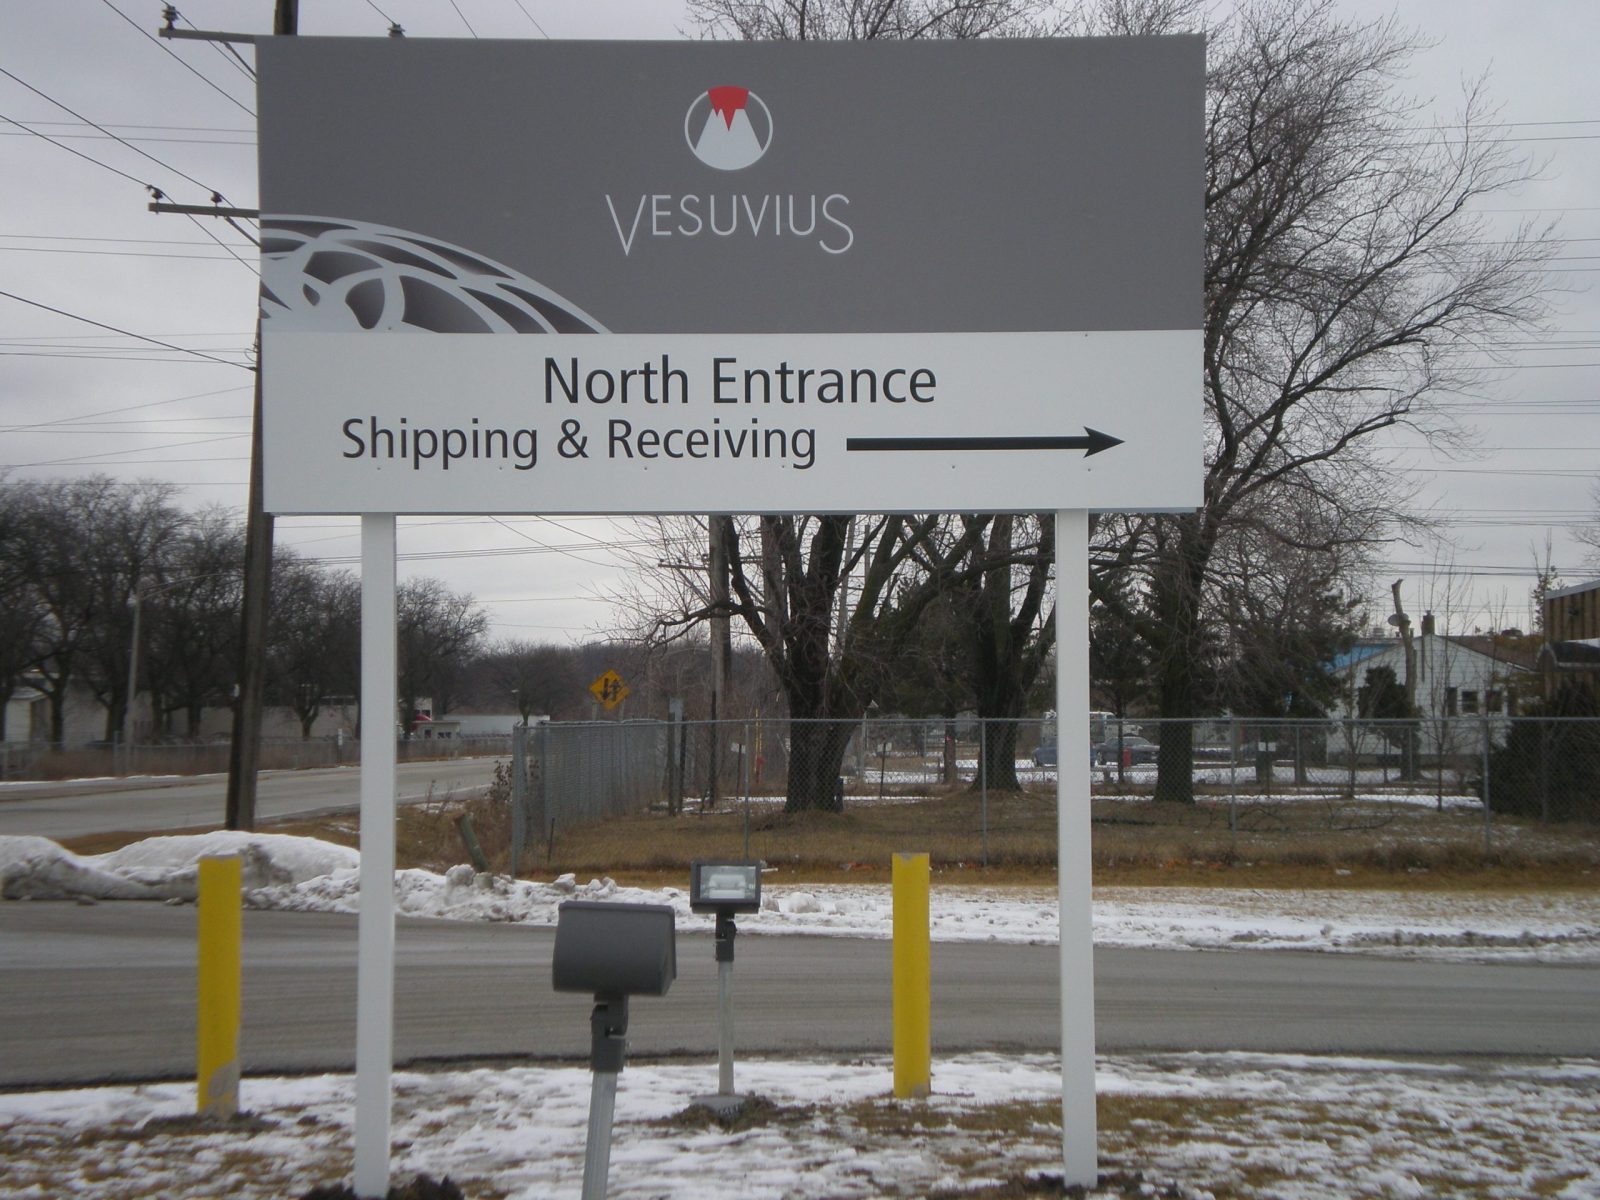 A panel white and gray sign giving directions to drivers, representing how one can benefit from calling a Merrillville sign company.